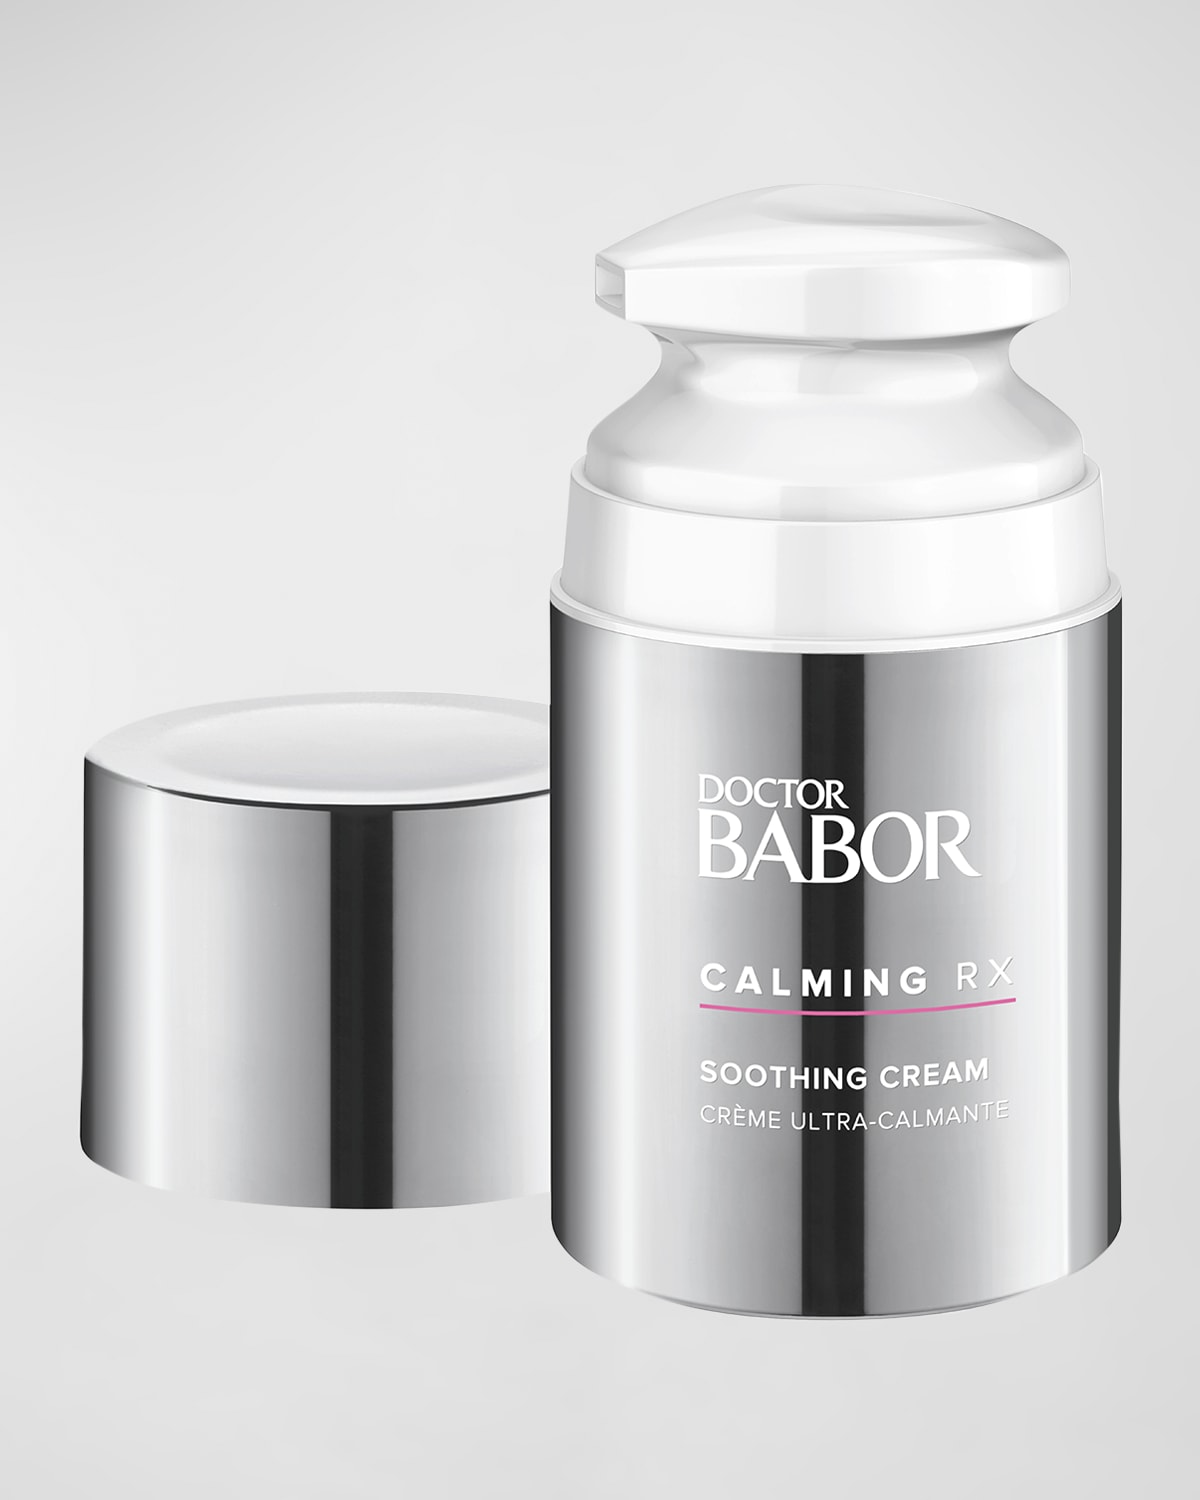 BABOR CALMING RX Soothing Cream